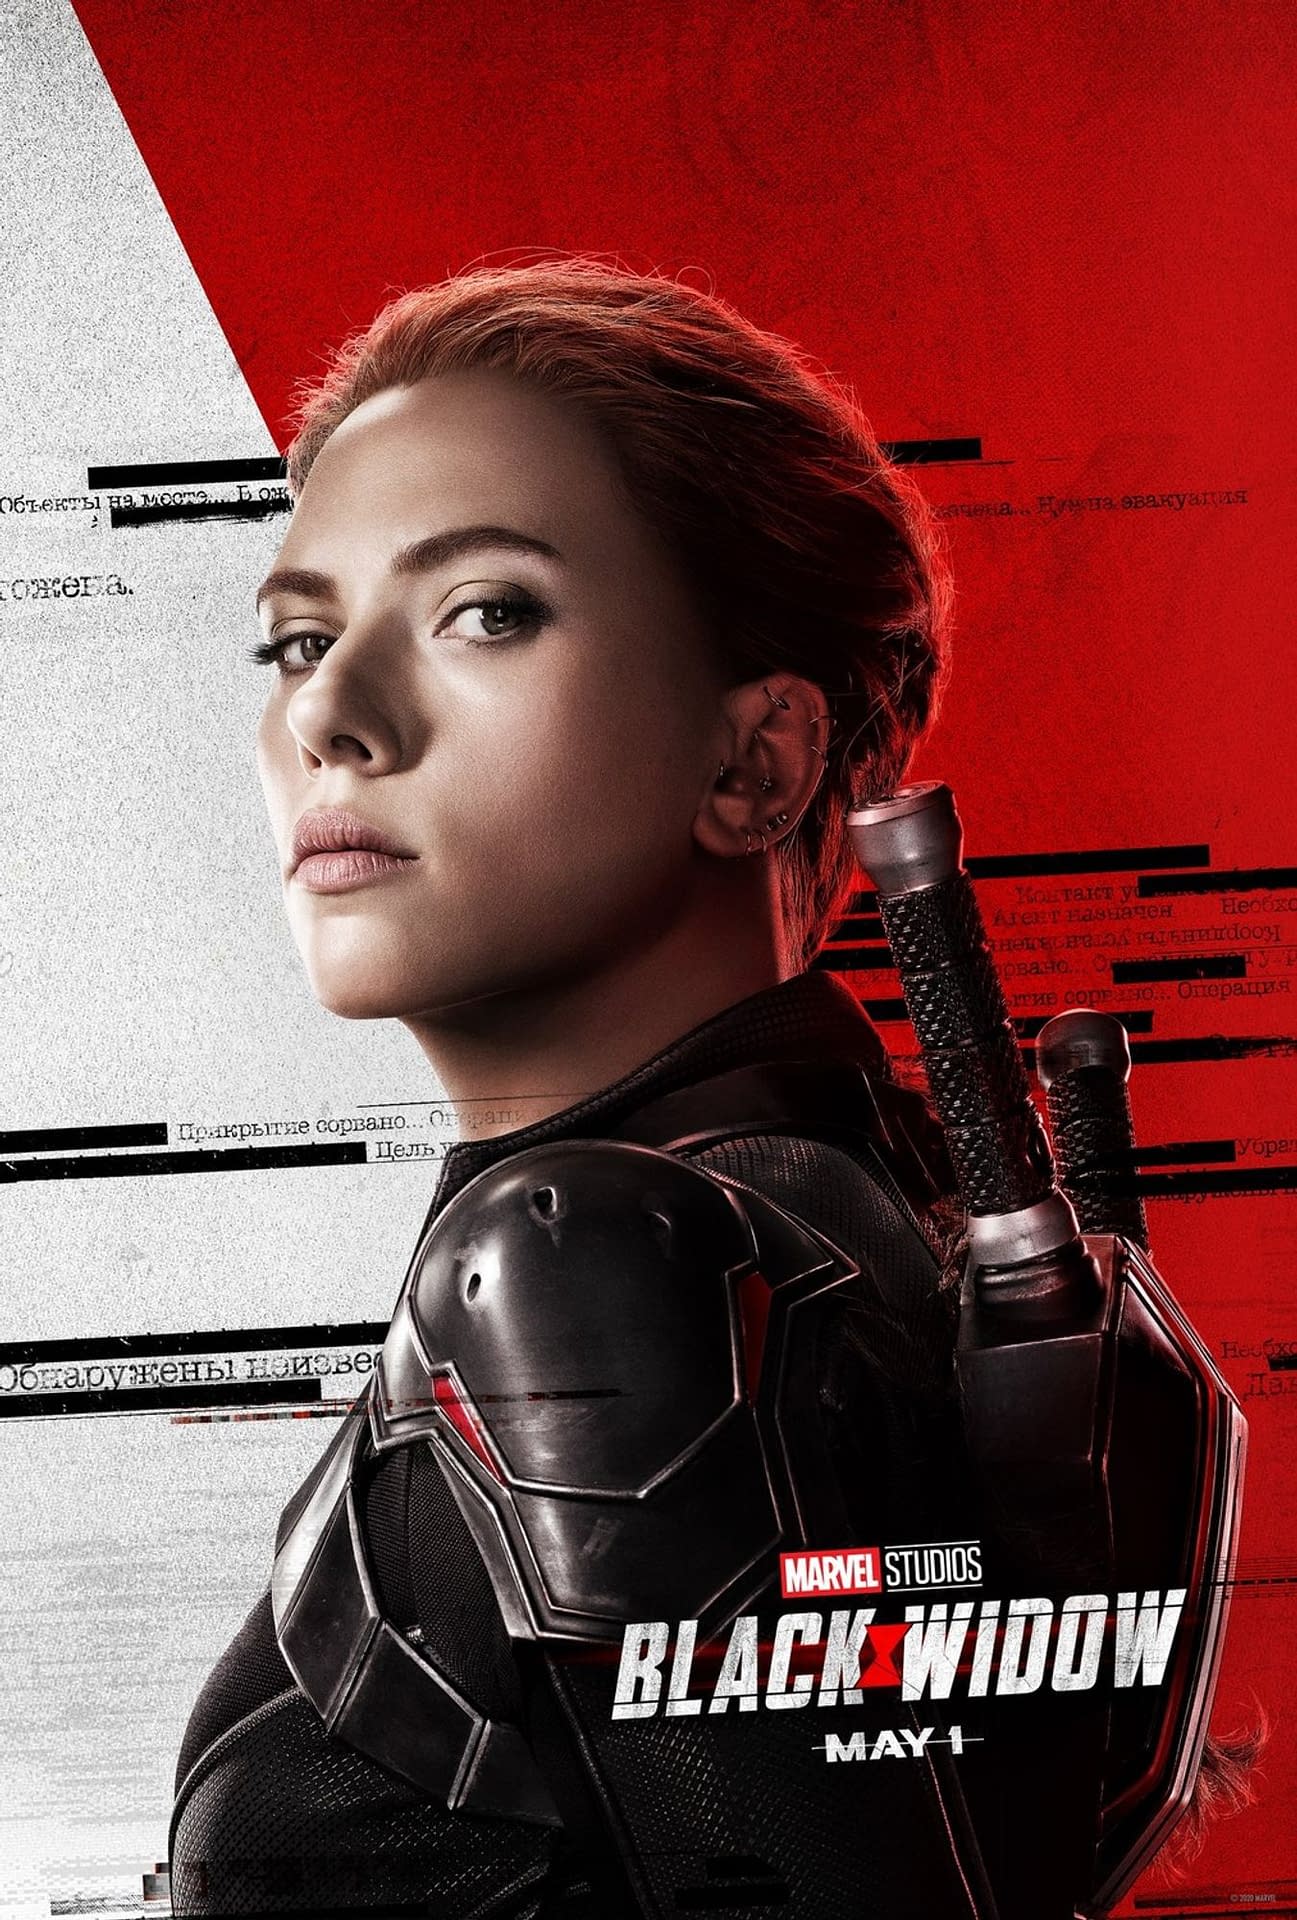 "Black Widow": The Filmmakers Really Wanted to "Get Under Her Skin"